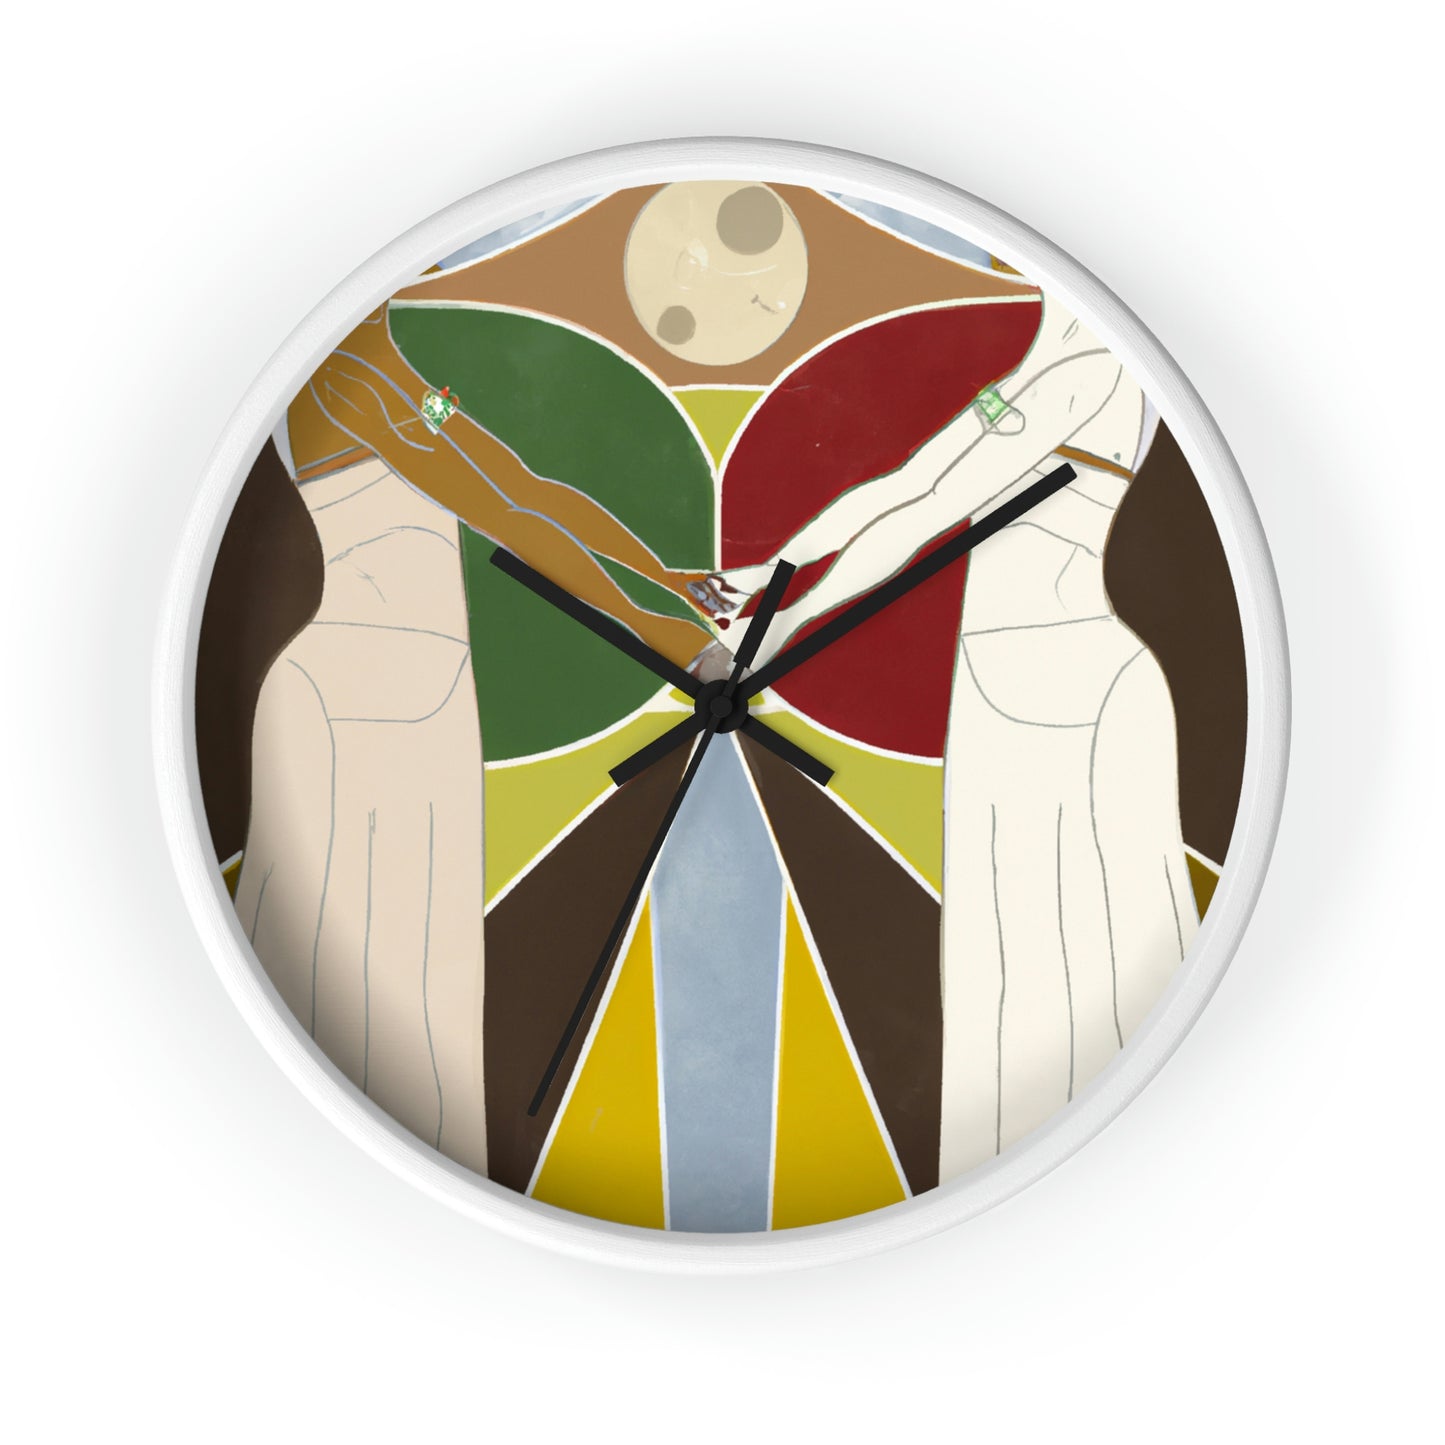 the world

The Unlikely Alliance: A Journey to Save the World - The Alien Wall Clock